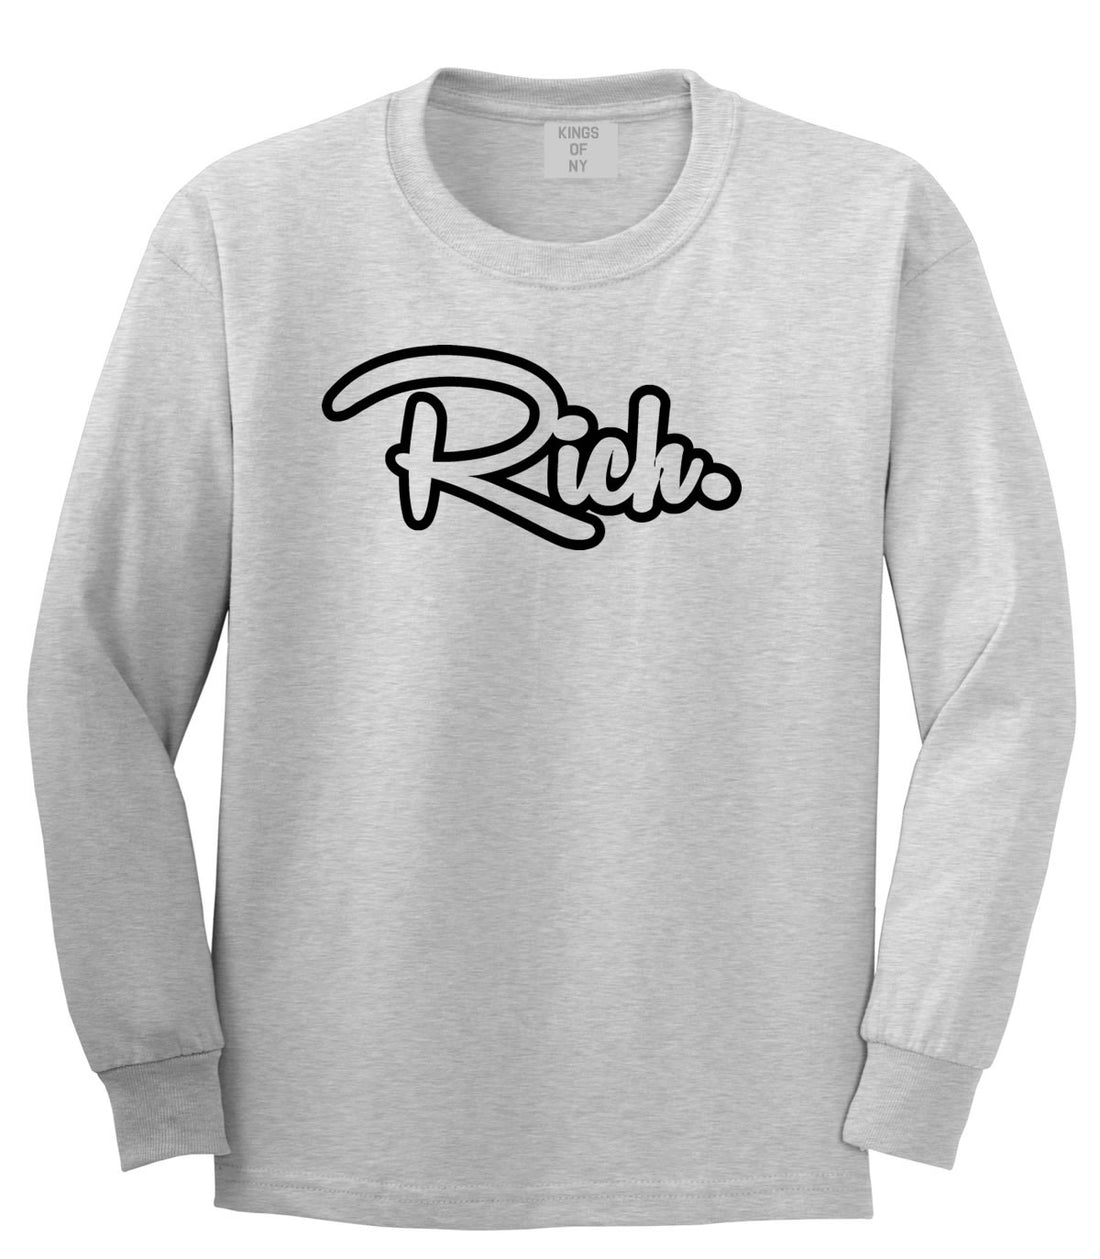 Rich Money Fab Style New York Richie NYC Long Sleeve Boys Kids T-Shirt In Grey by Kings Of NY